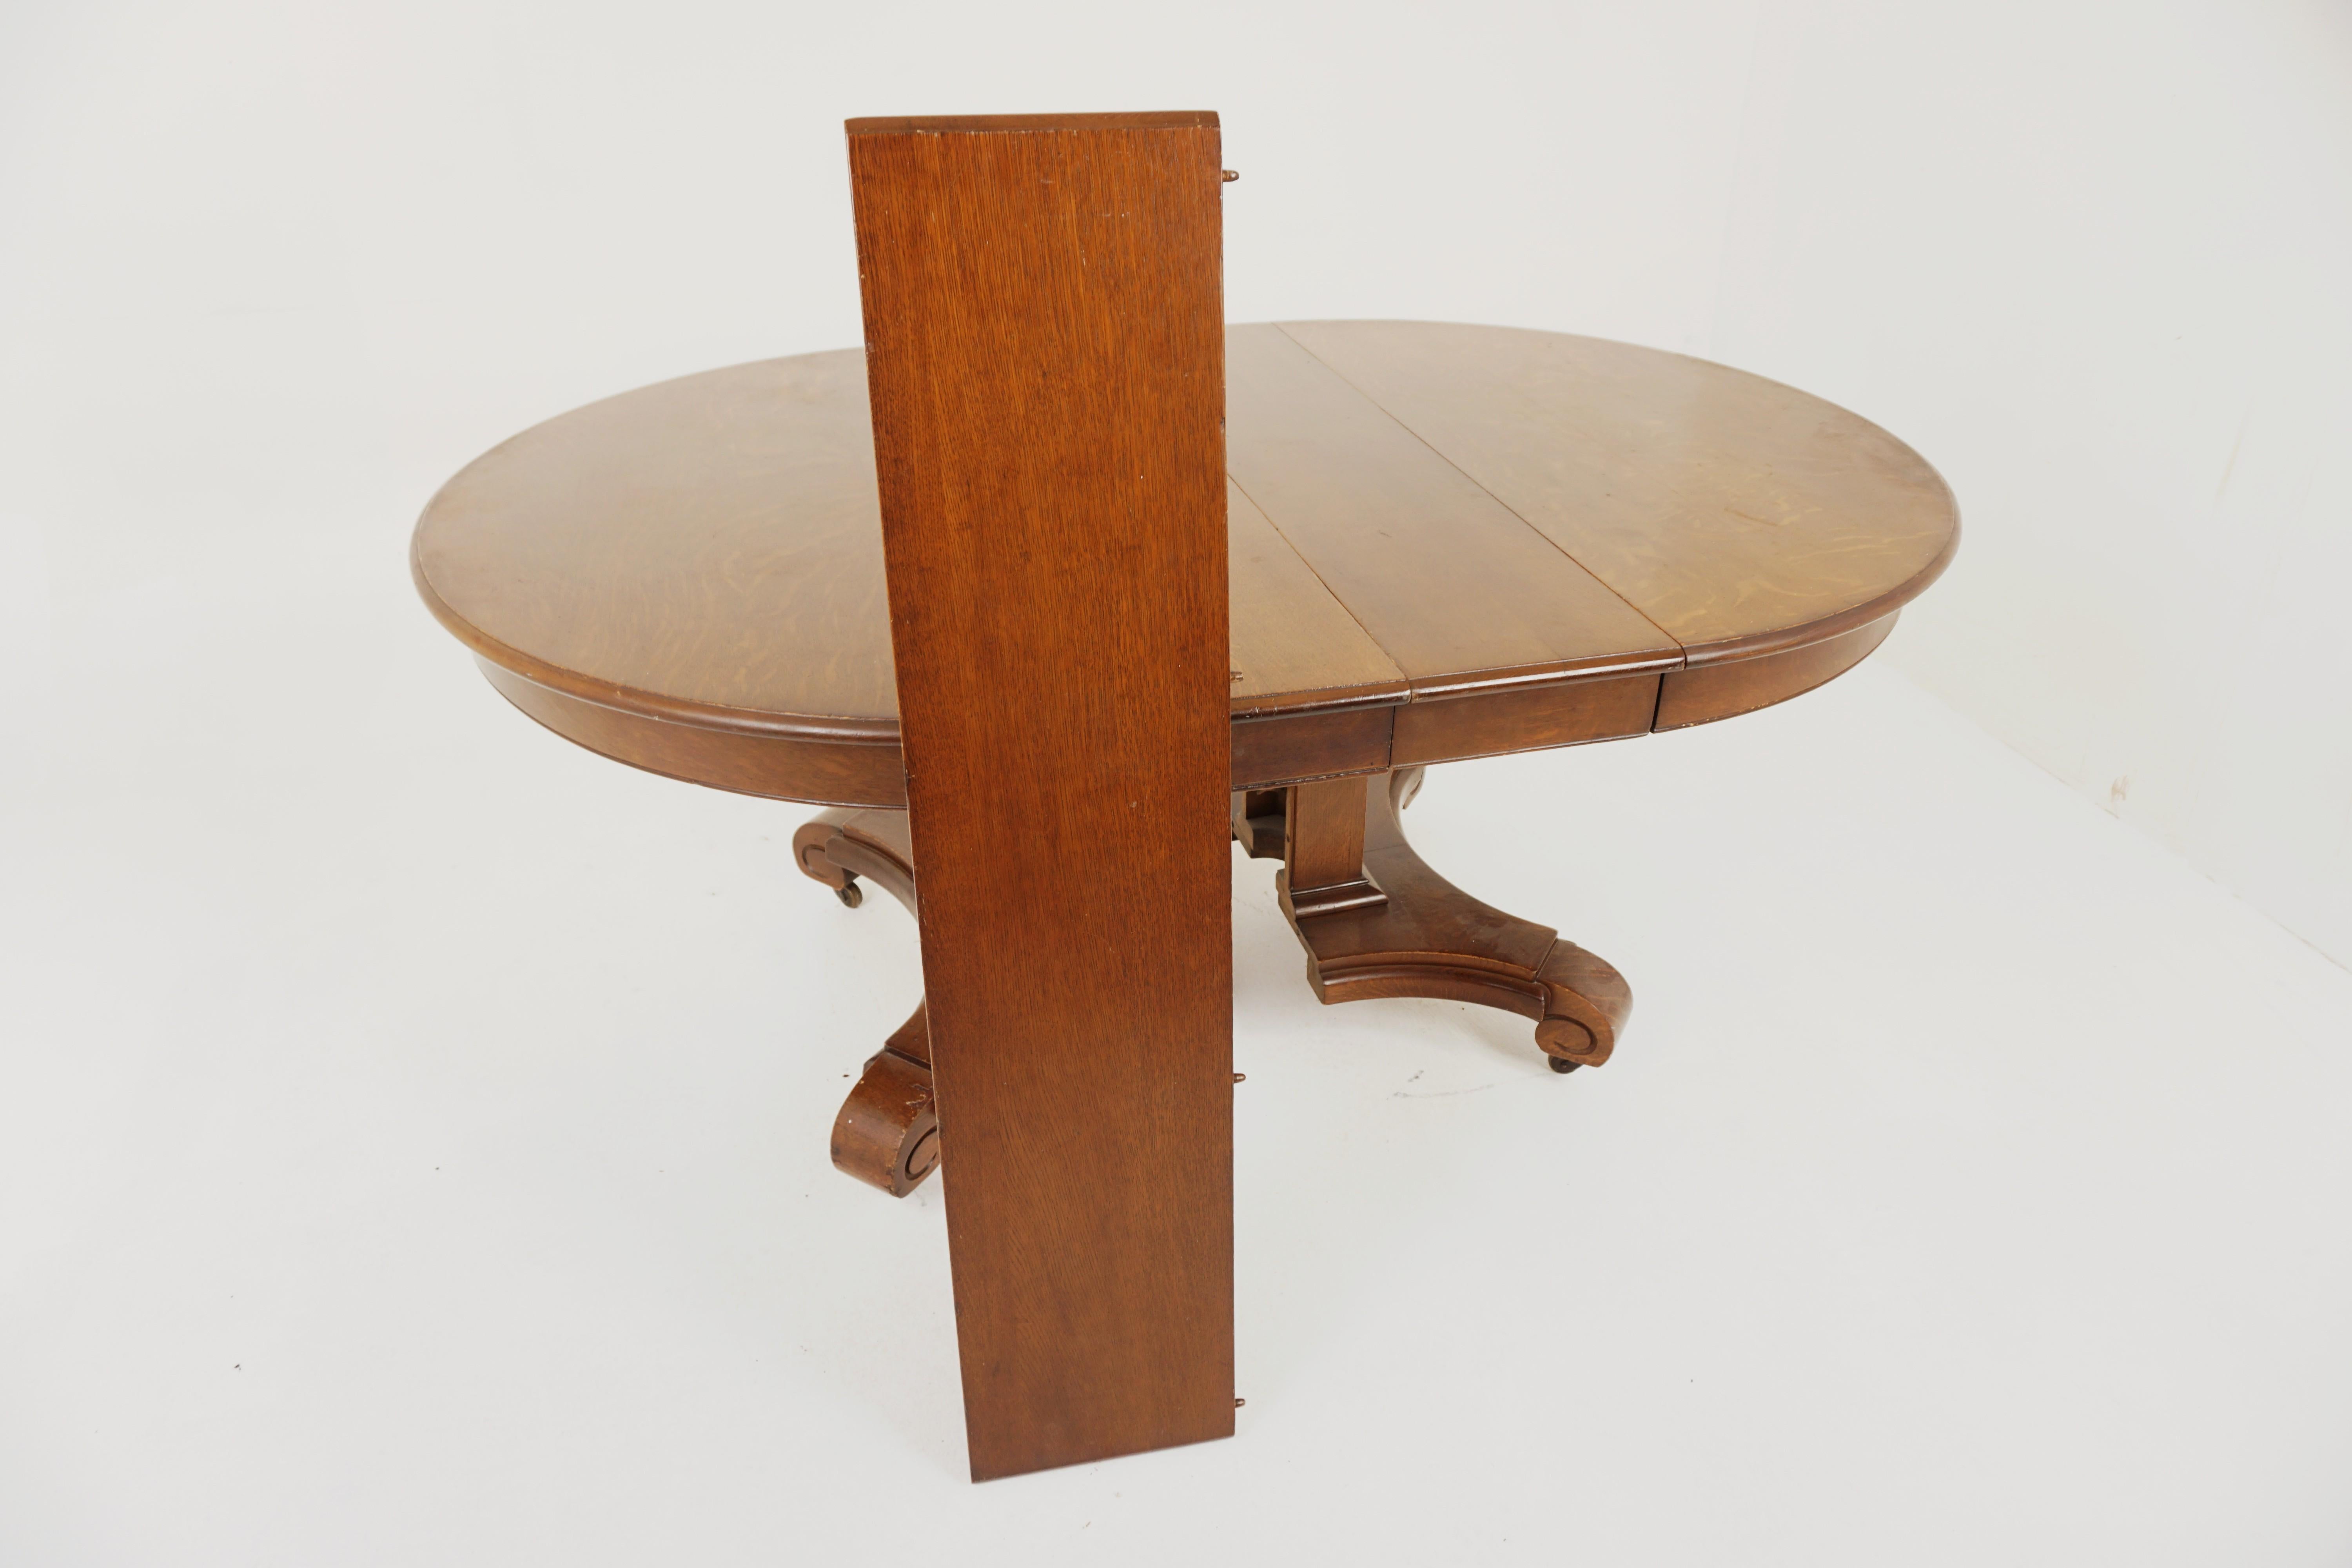 Mission Tiger Oak Arts & Crafts Round Dining Table 3 Leaves, America 1920, H1197 In Good Condition For Sale In Vancouver, BC